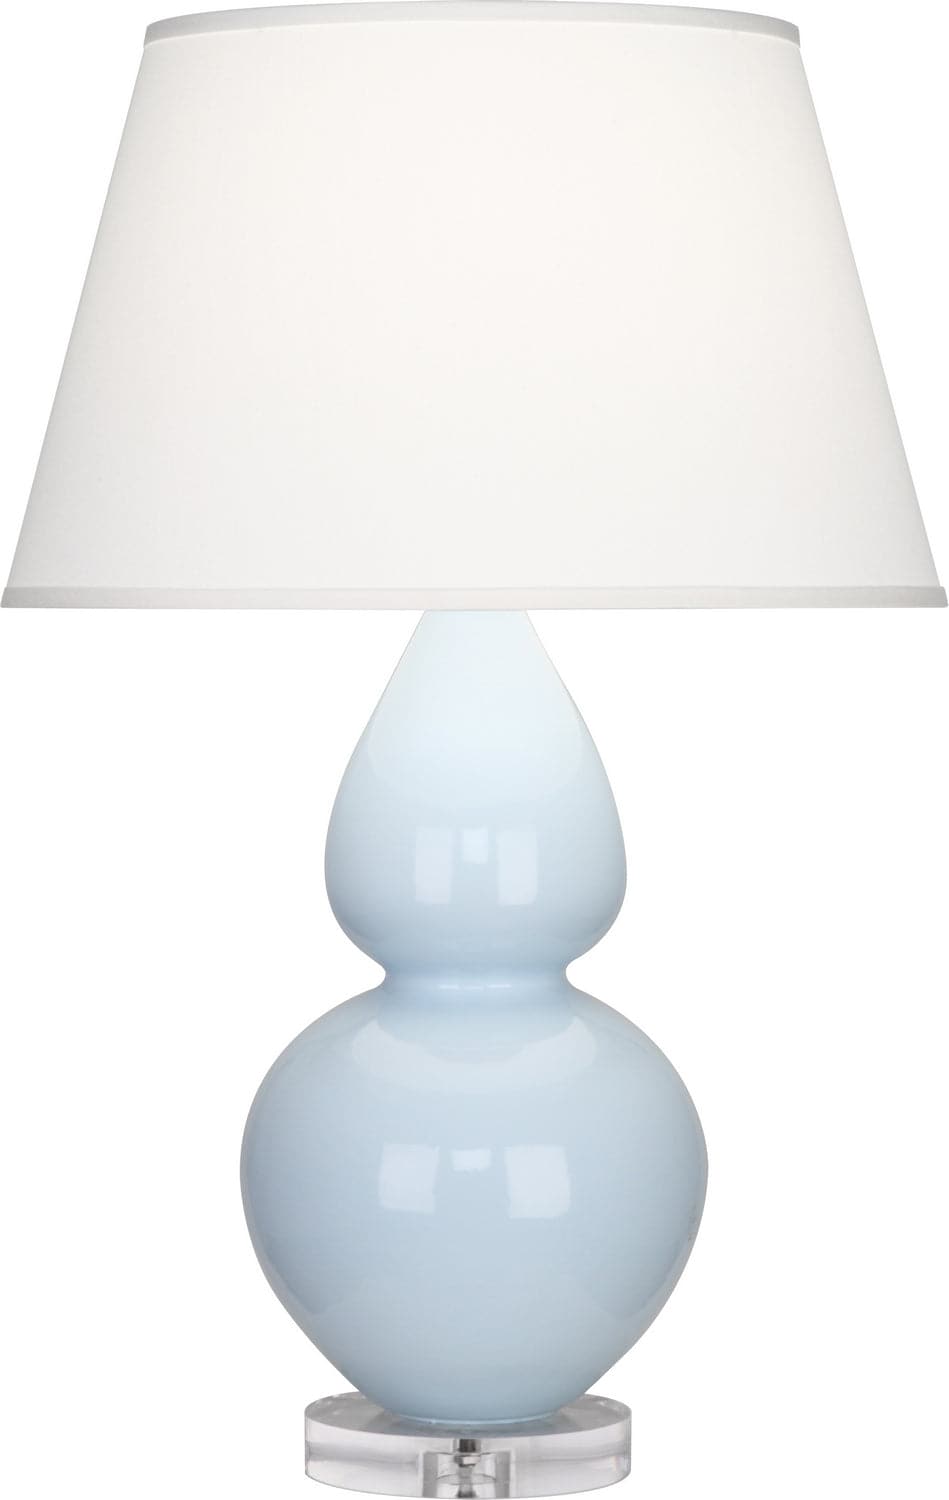 Robert Abbey - A676X - One Light Table Lamp - Double Gourd - Baby Blue Glazed w/Lucite Base